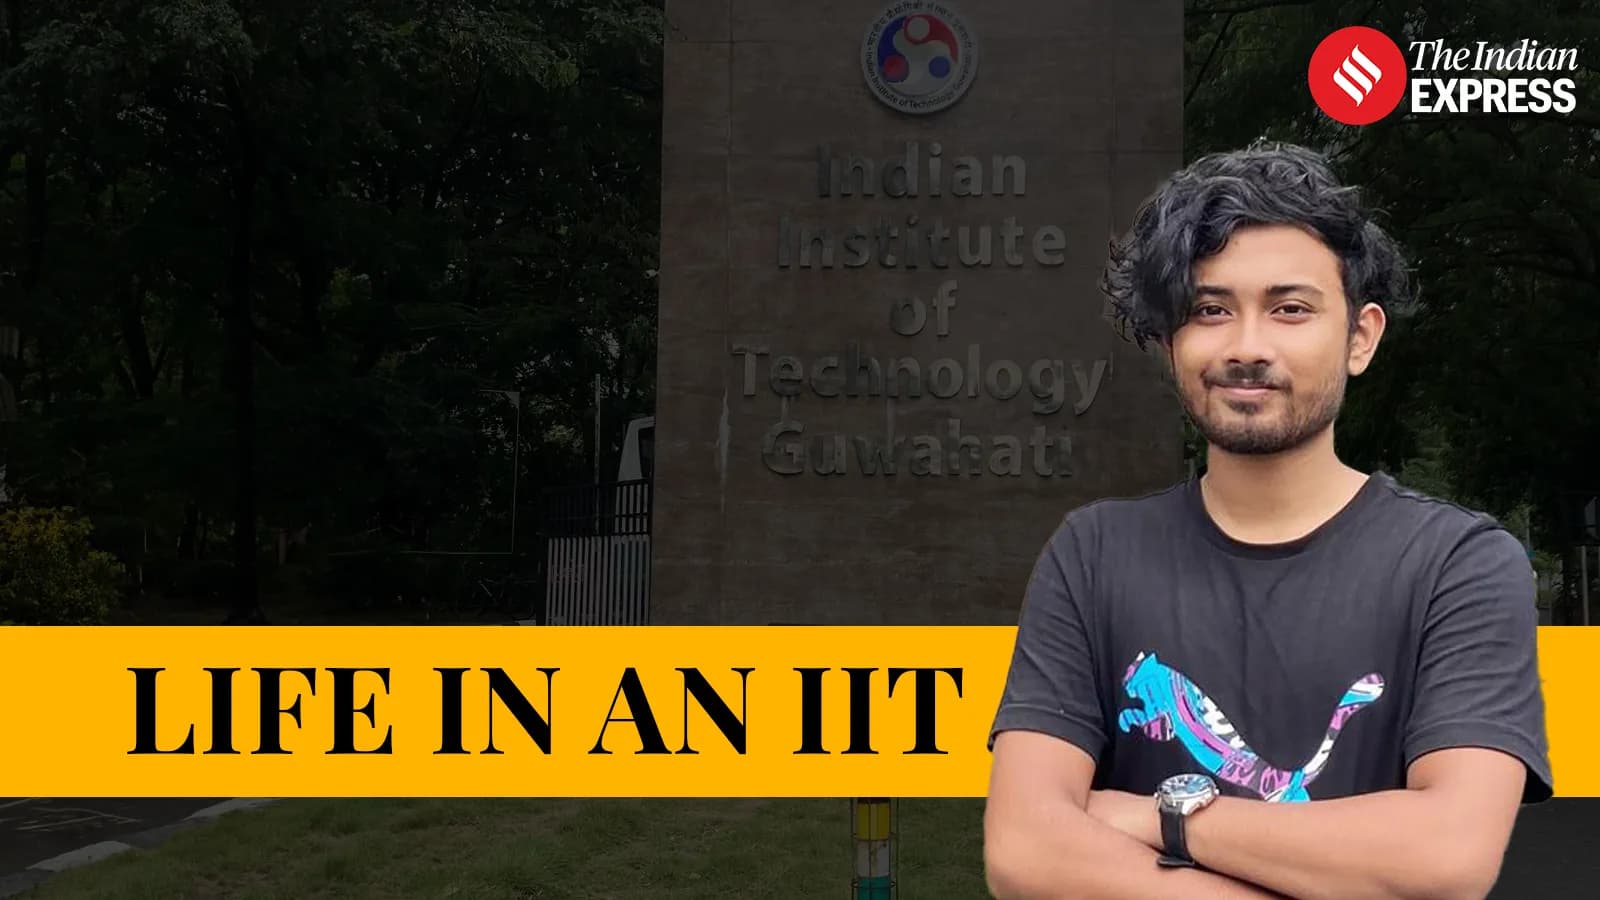 MA Development Studies student at IIT Guwahati shares why he chose this stream after Class 12th science and a BA